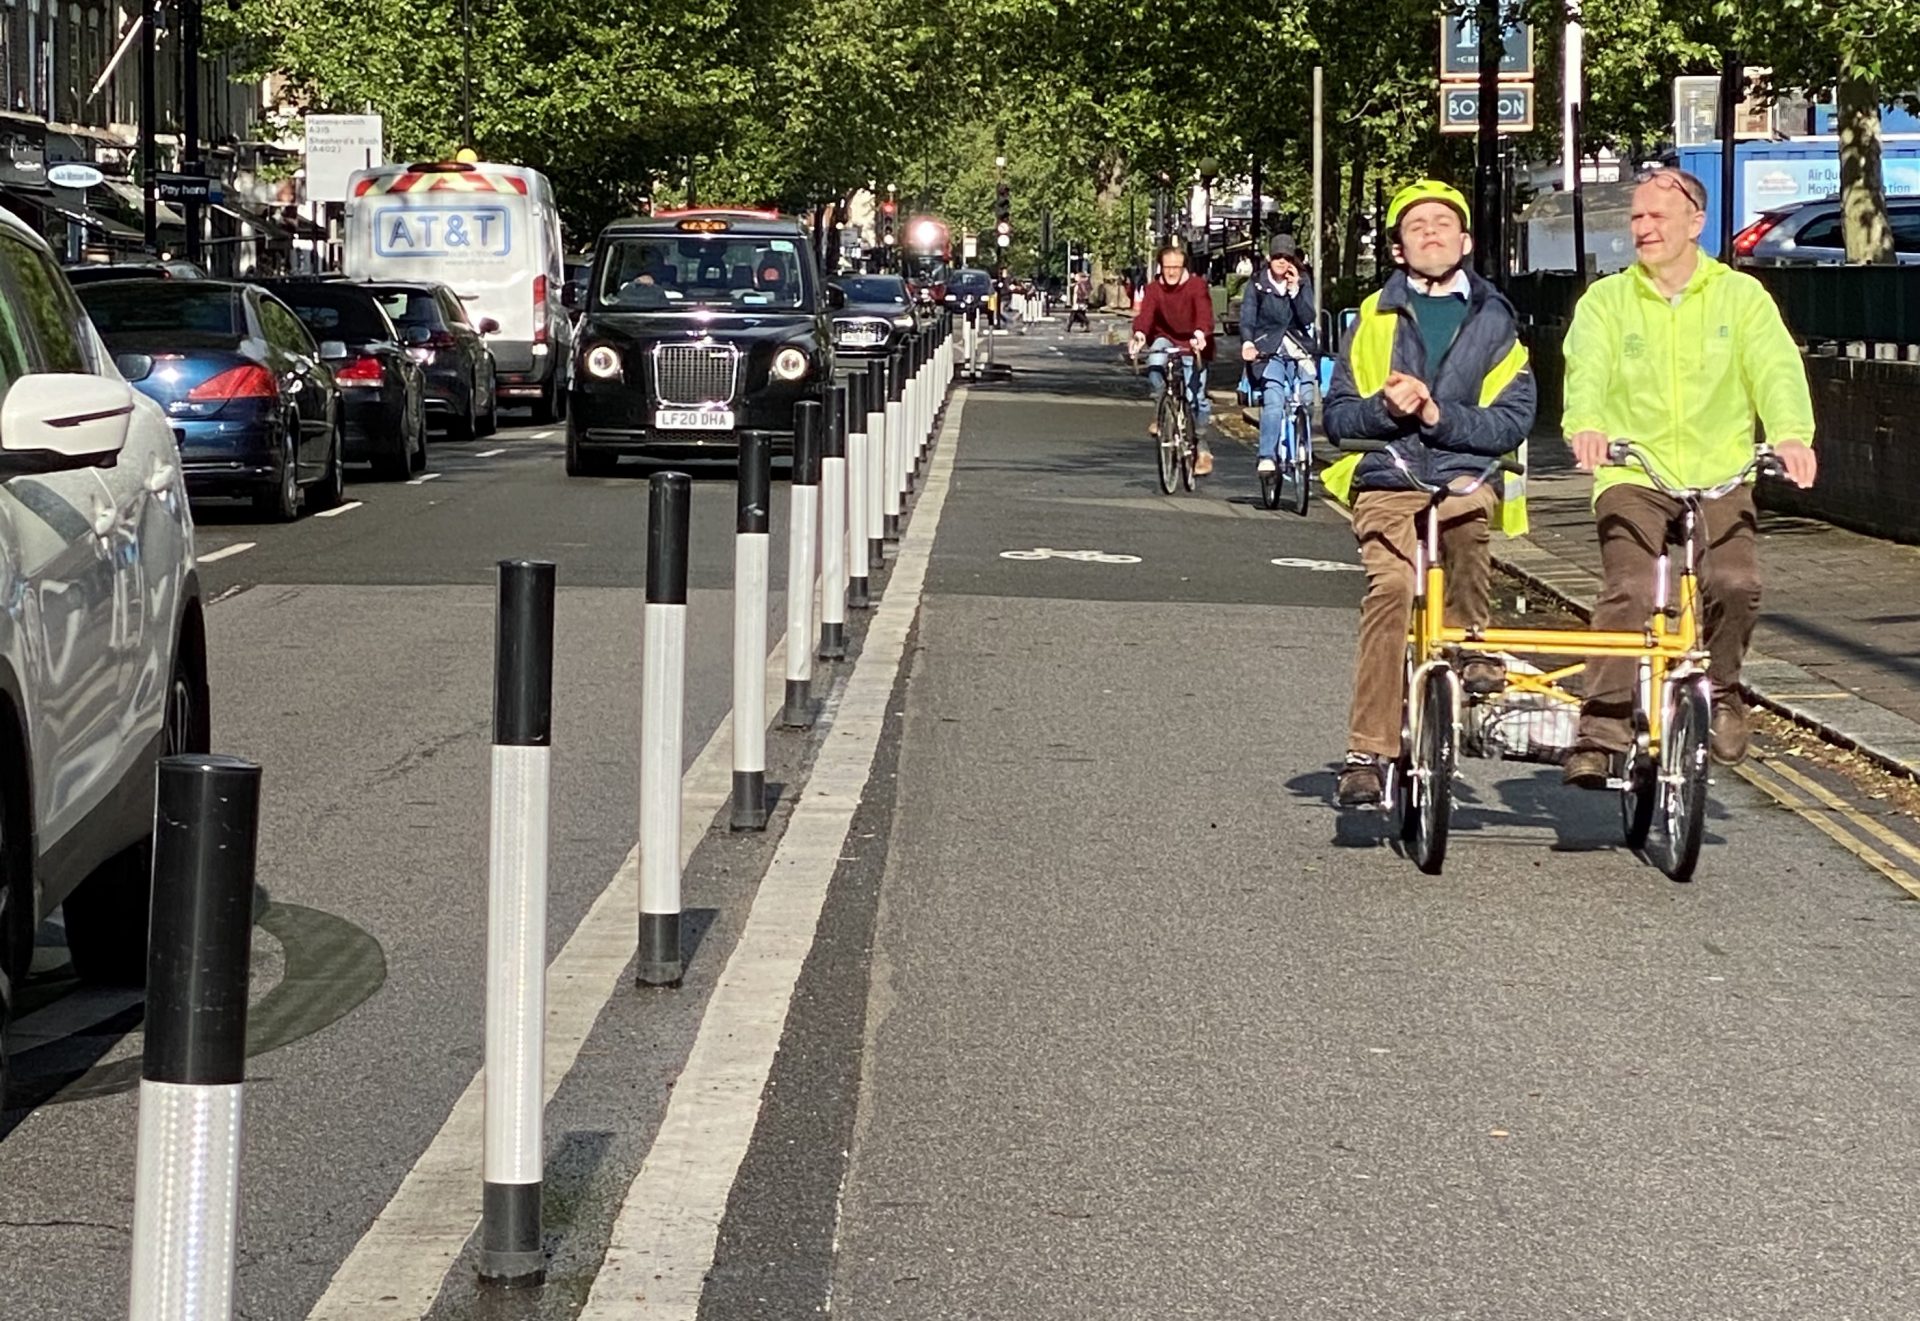 Caring for cyclists, caring for streets